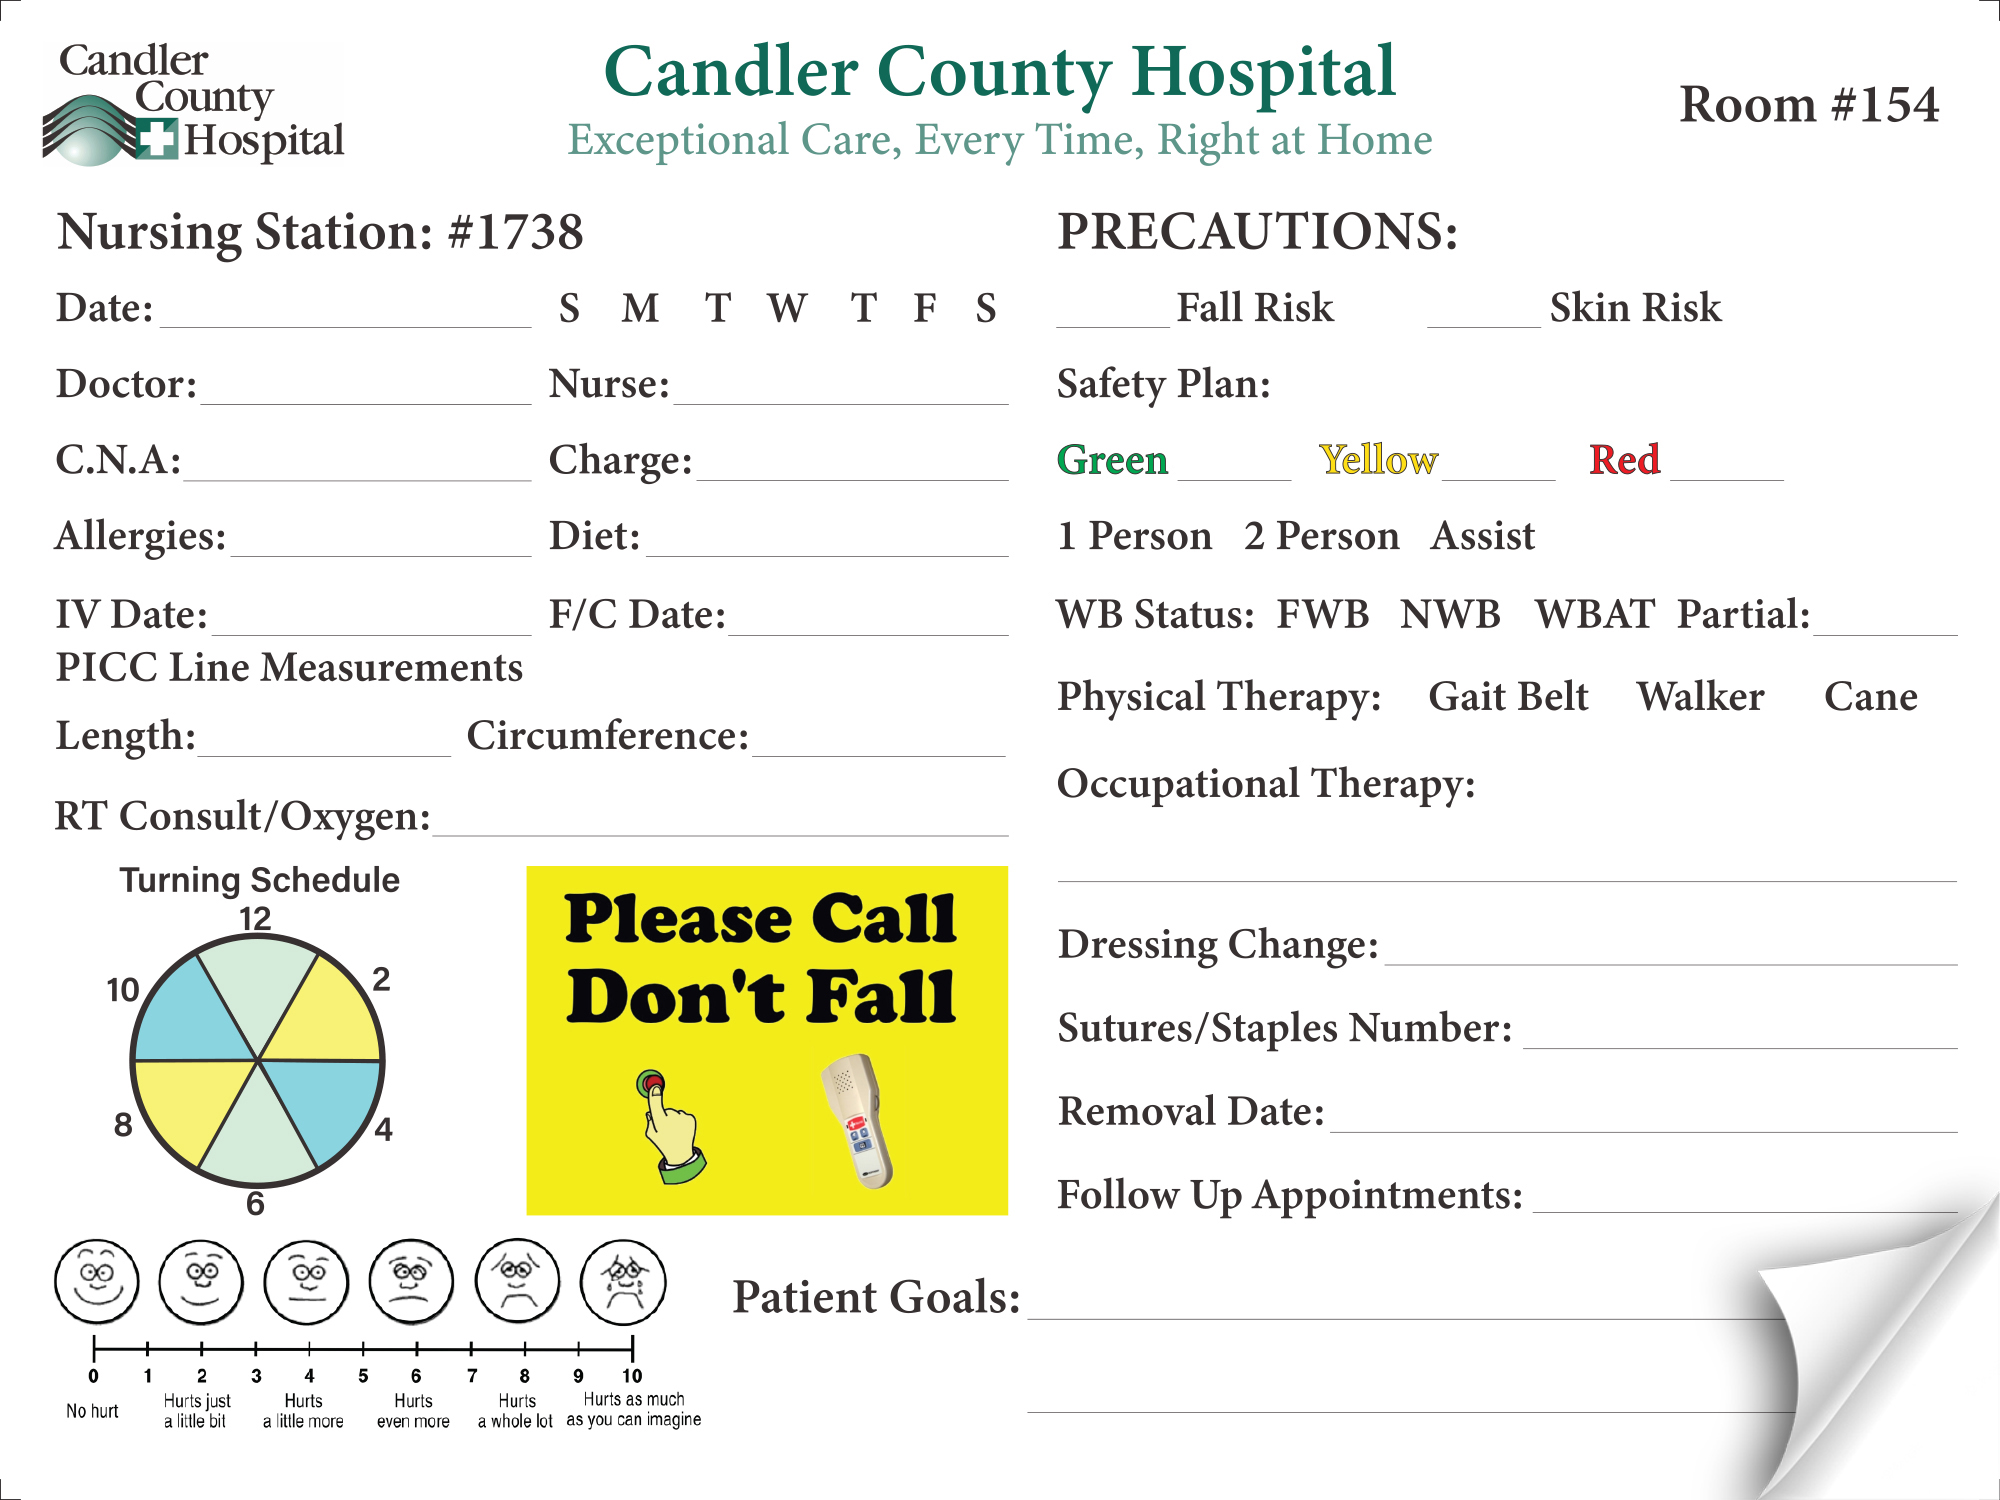 Candler County Hospital peel and stick custom printed